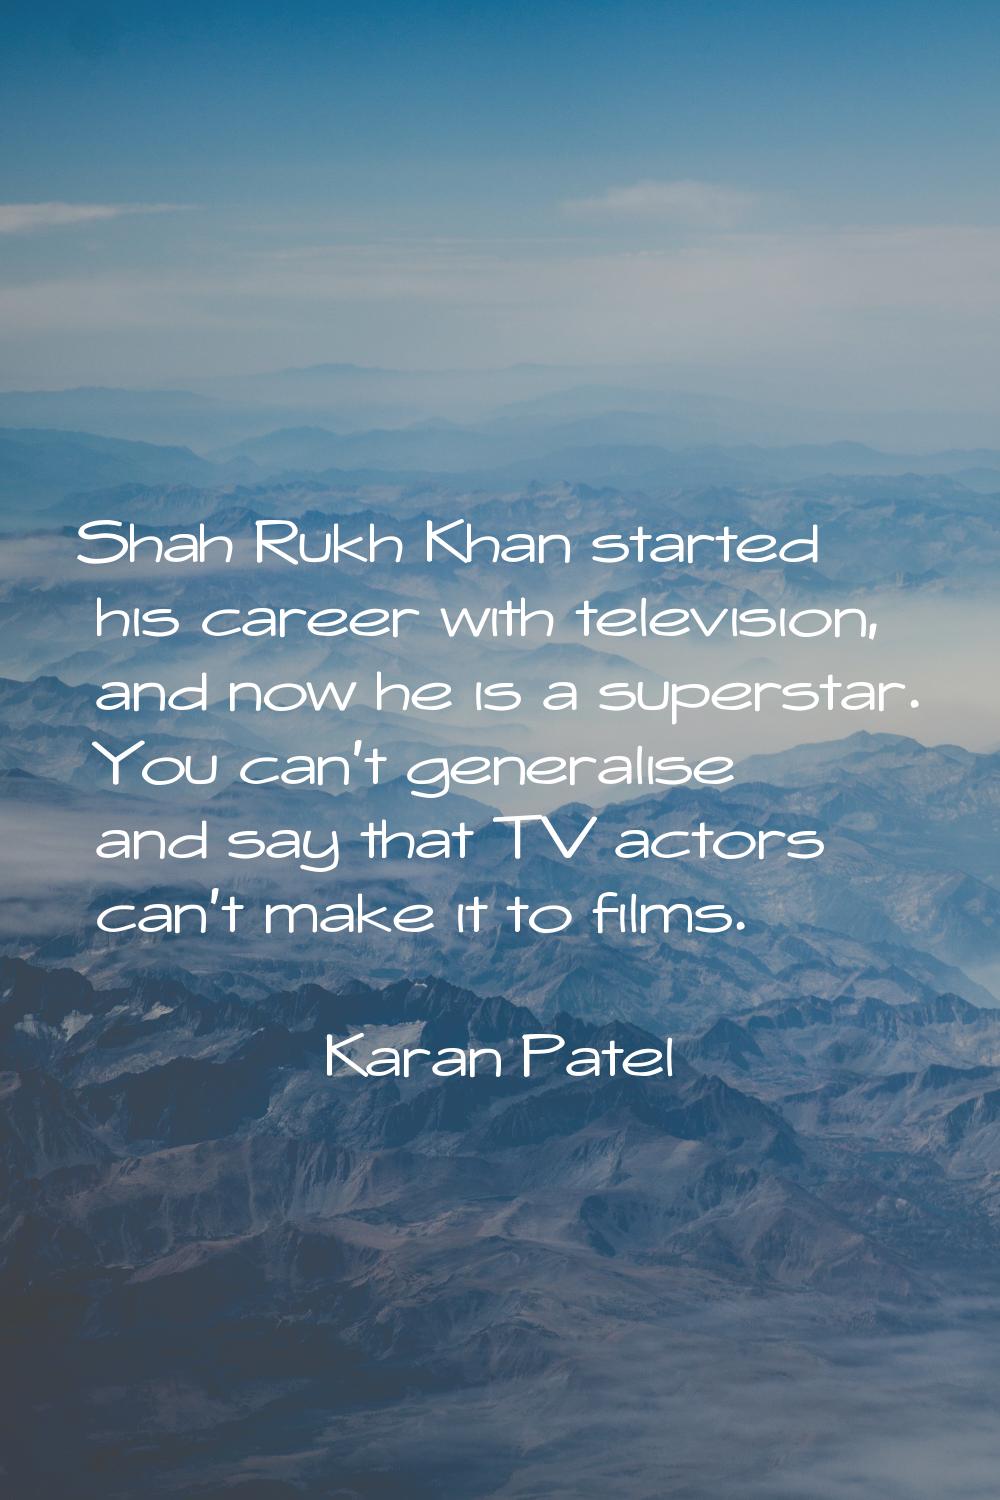 Shah Rukh Khan started his career with television, and now he is a superstar. You can't generalise 